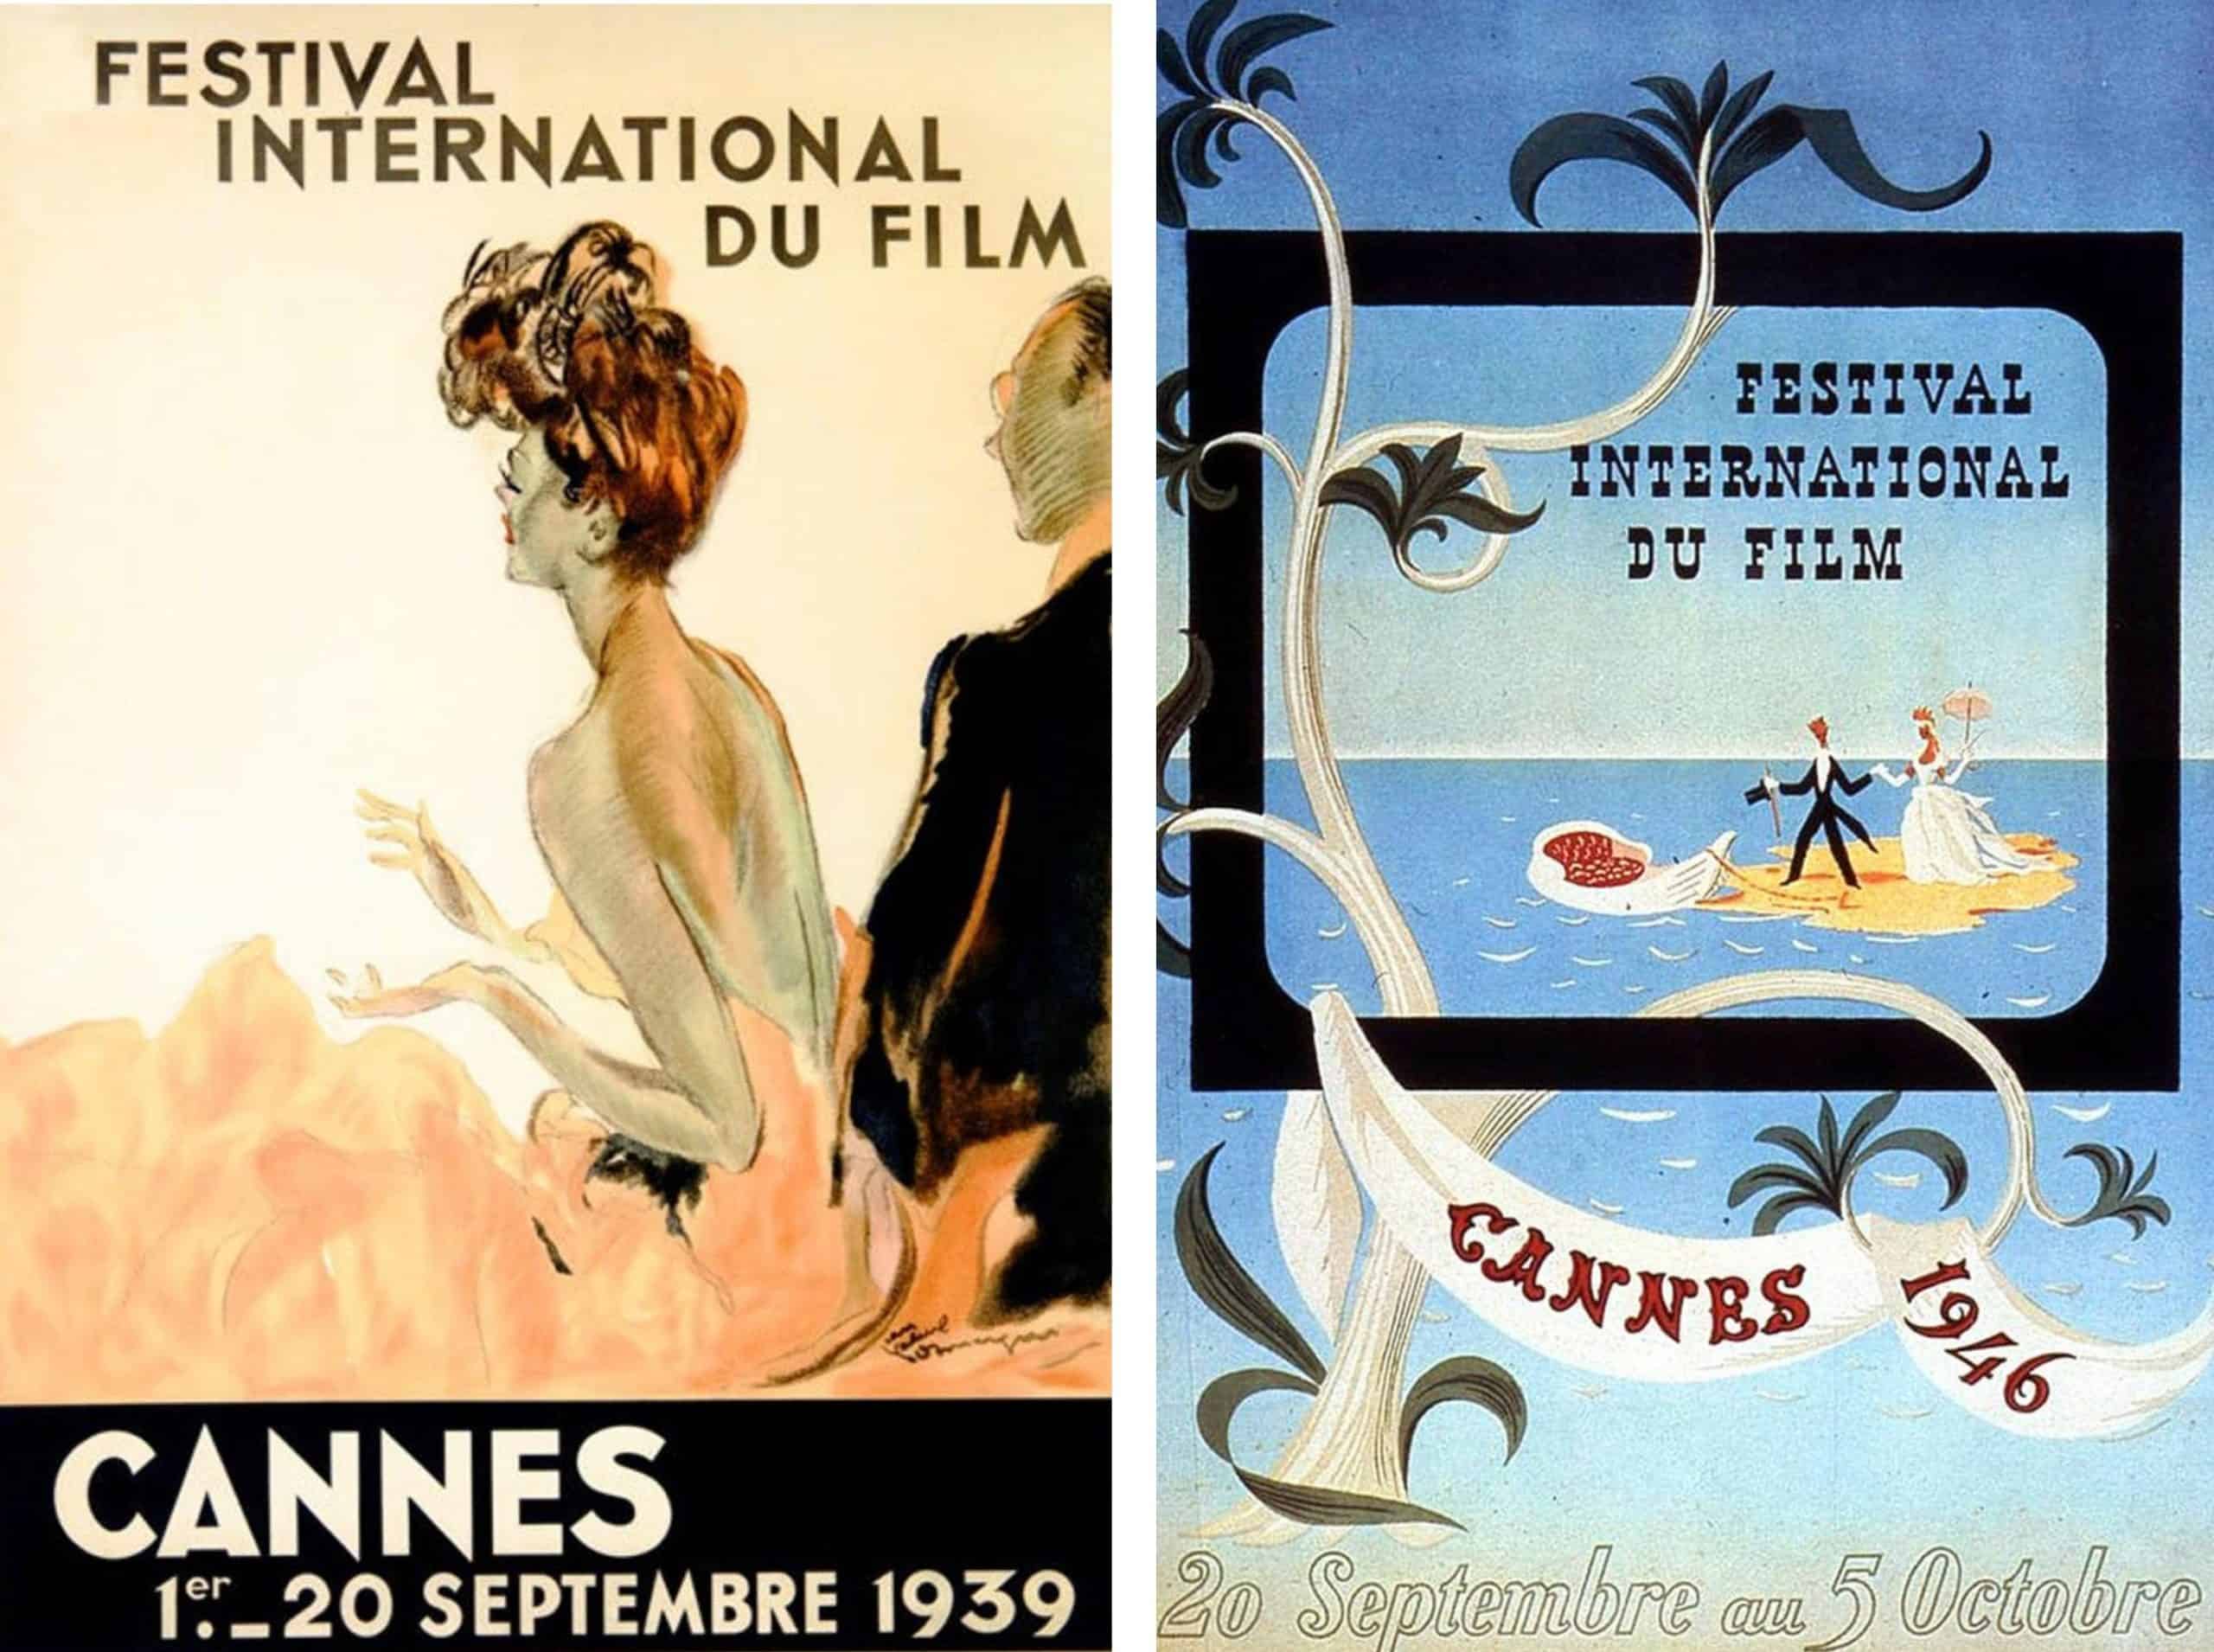 Cannes Film Festival posters from 1939 and 1946